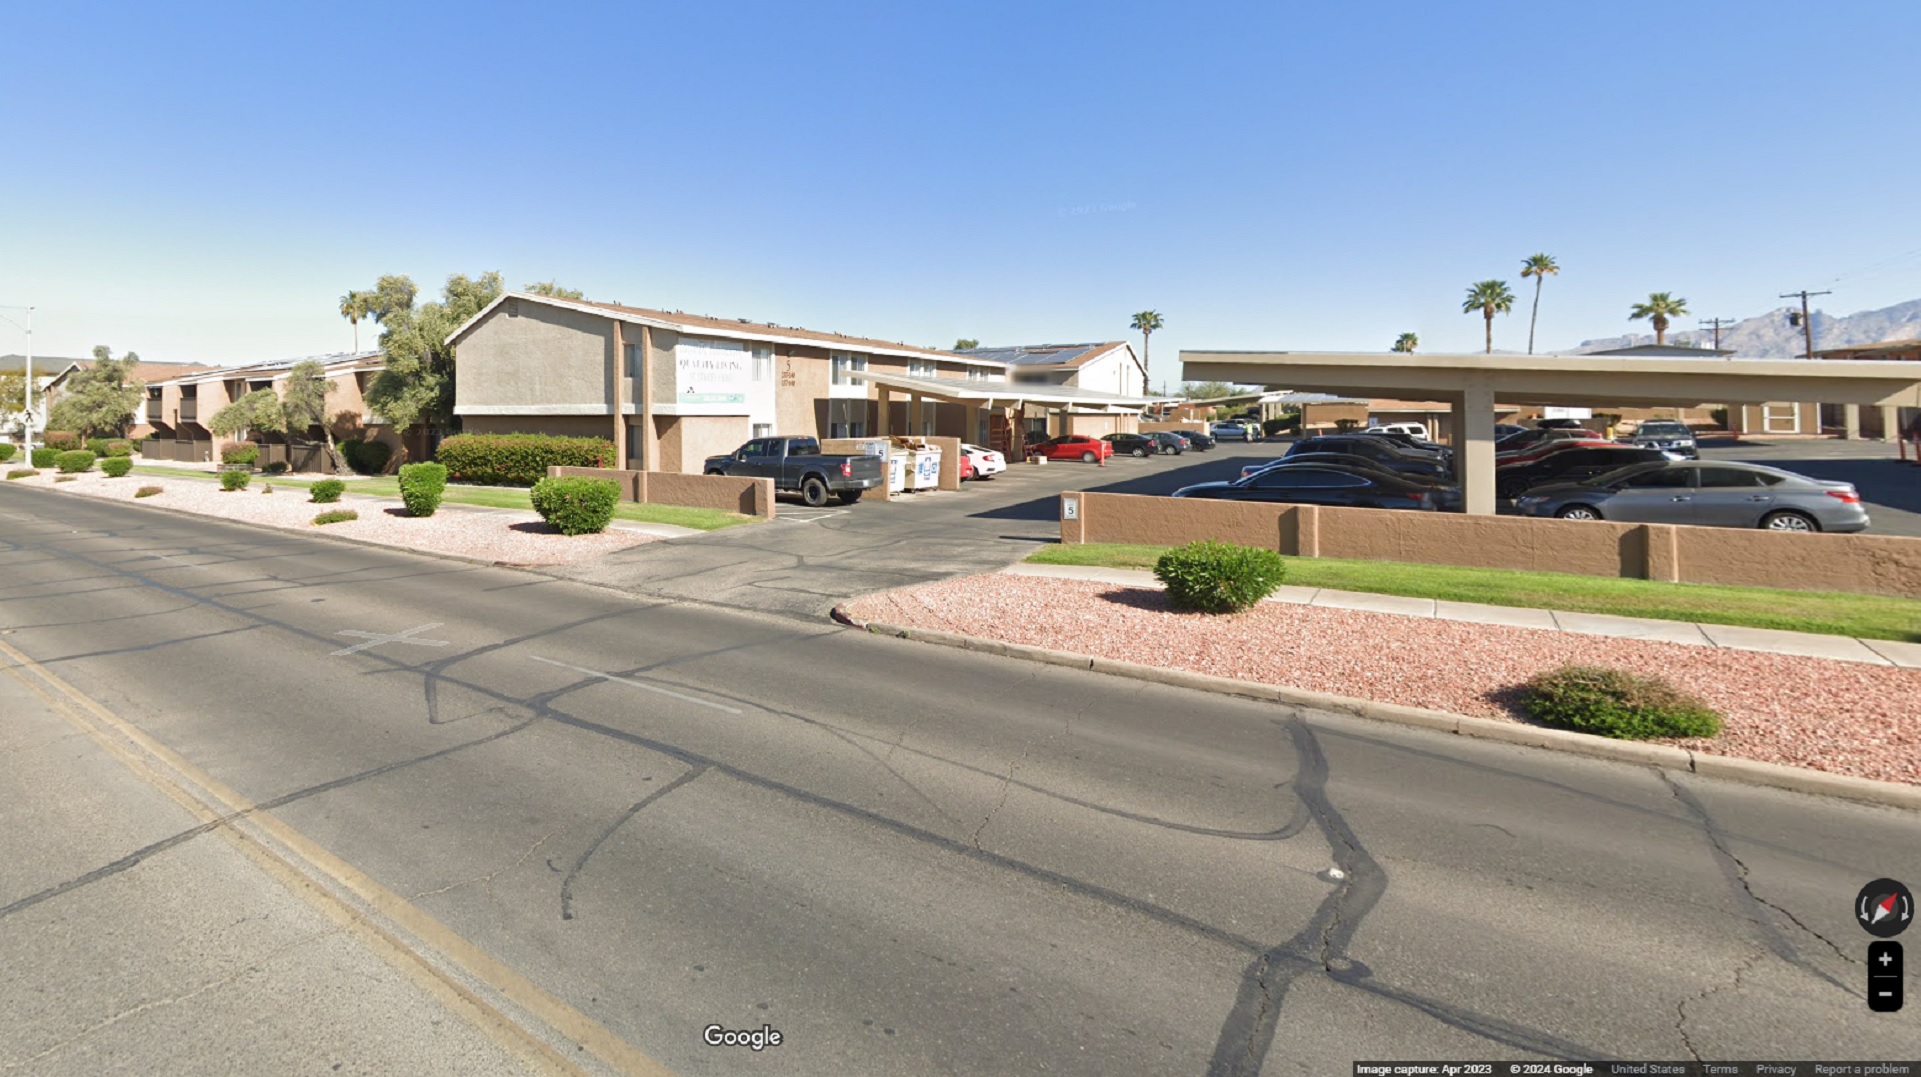 The Capistrano Apartments, on East 6th Street, is a Tucson apartment complex.